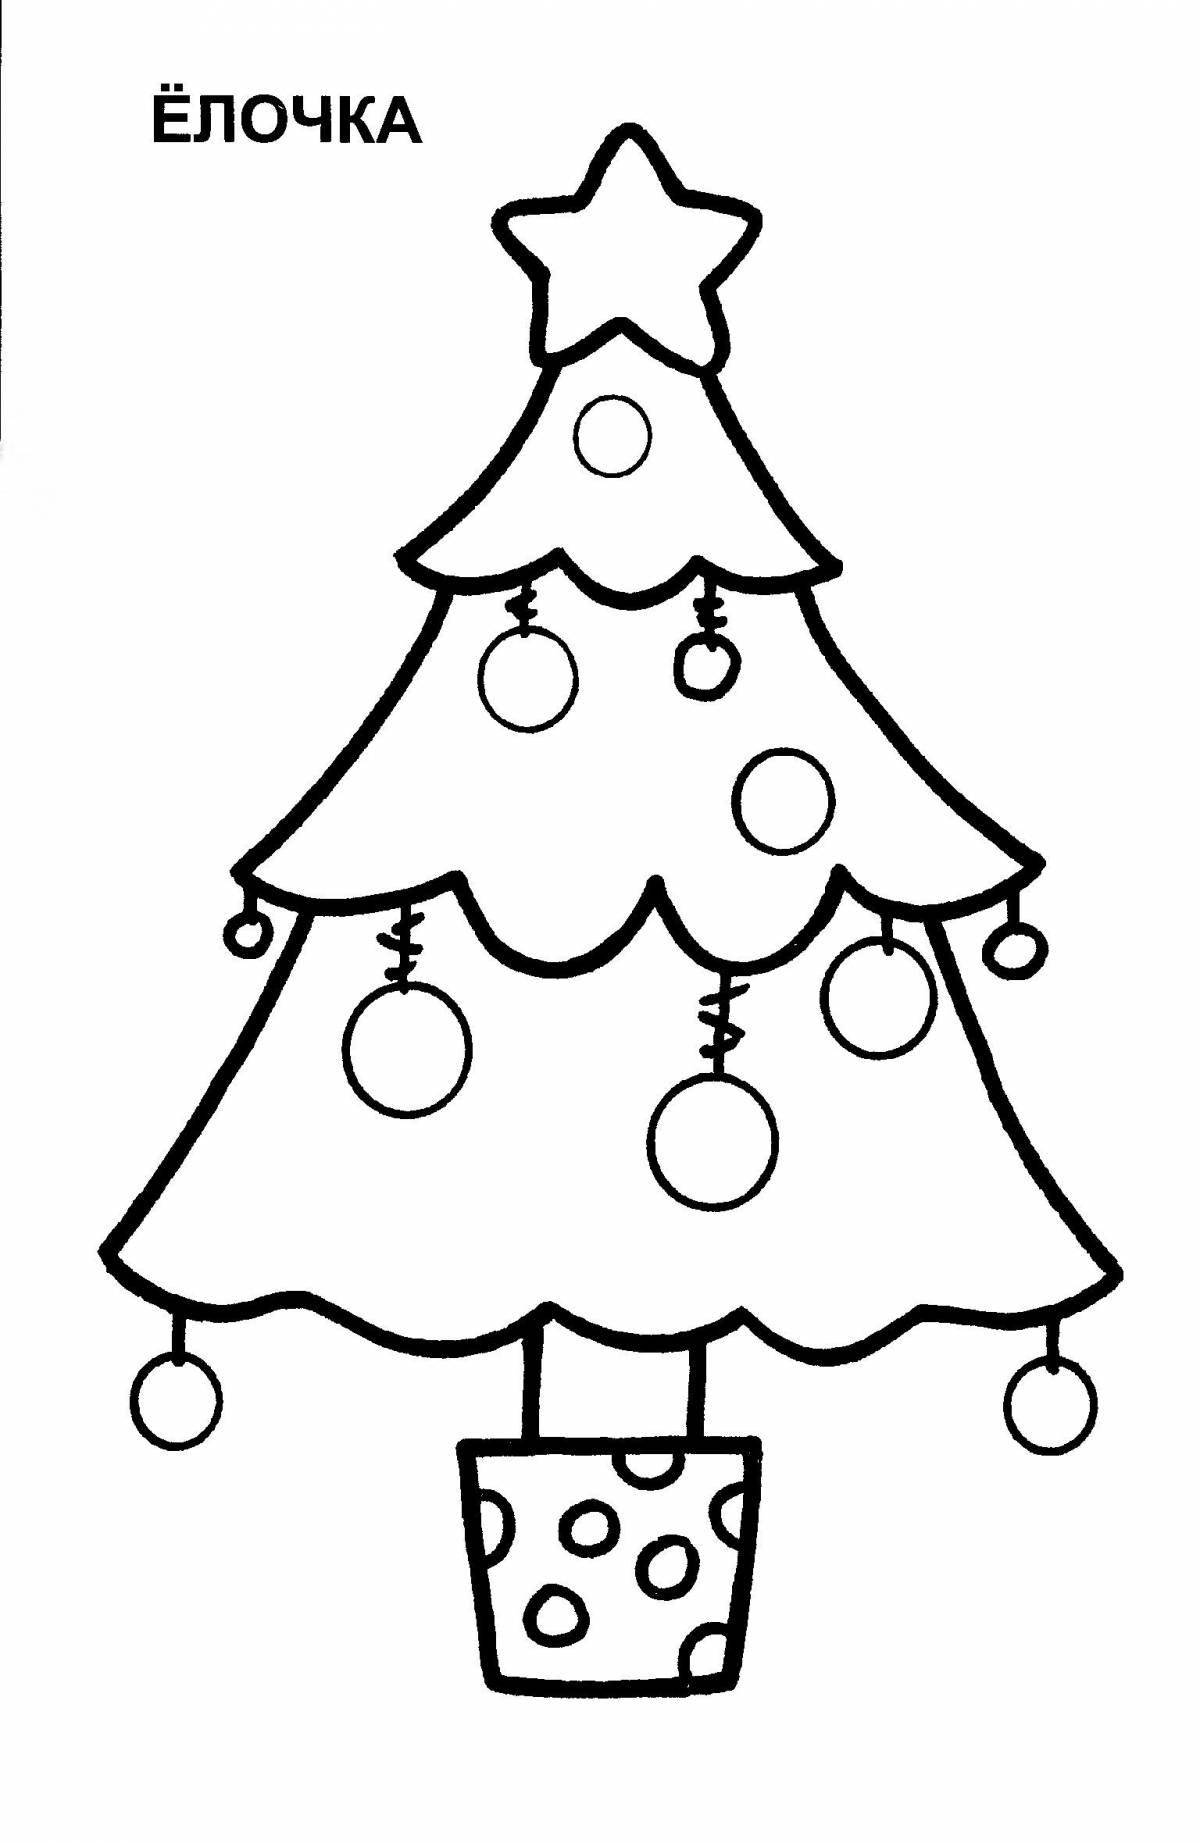 Crazy Tree Coloring Page for 2-3 year olds